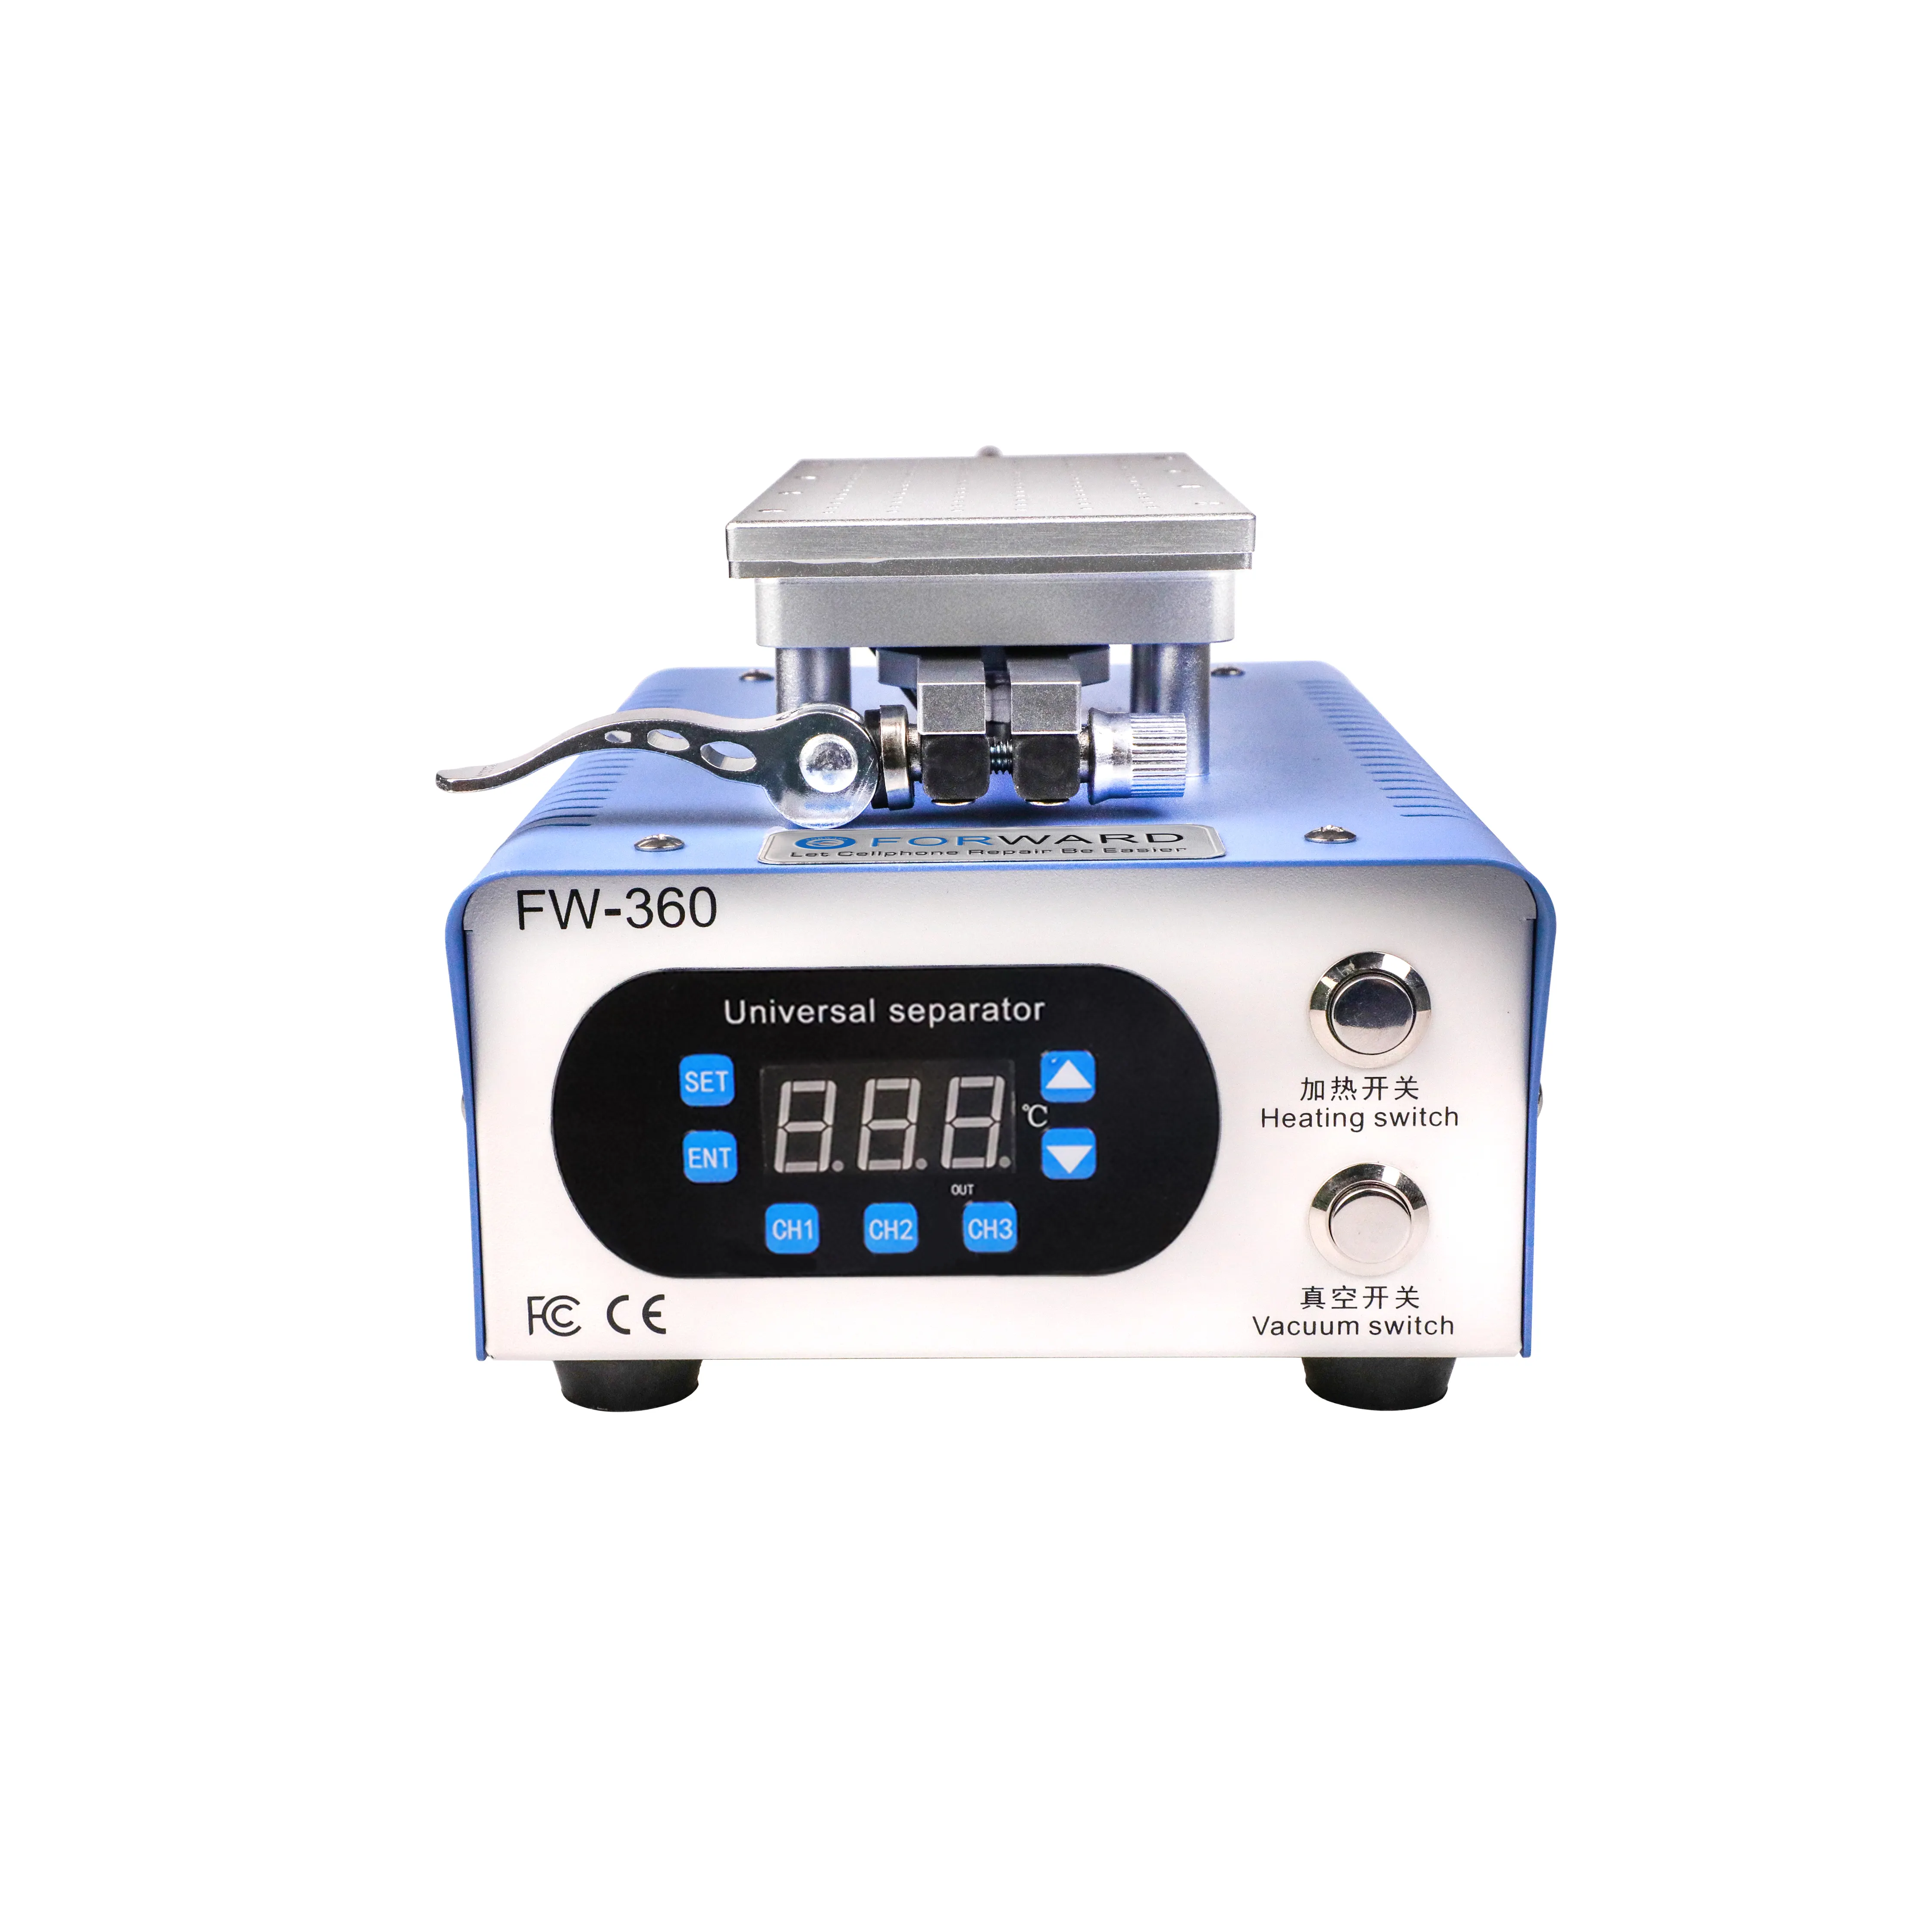 FORWARD Mobile Touch Glass Remover FW-360 Rotary LCD Separator Machine Two-Button Control For Broken Touch Glass Repair